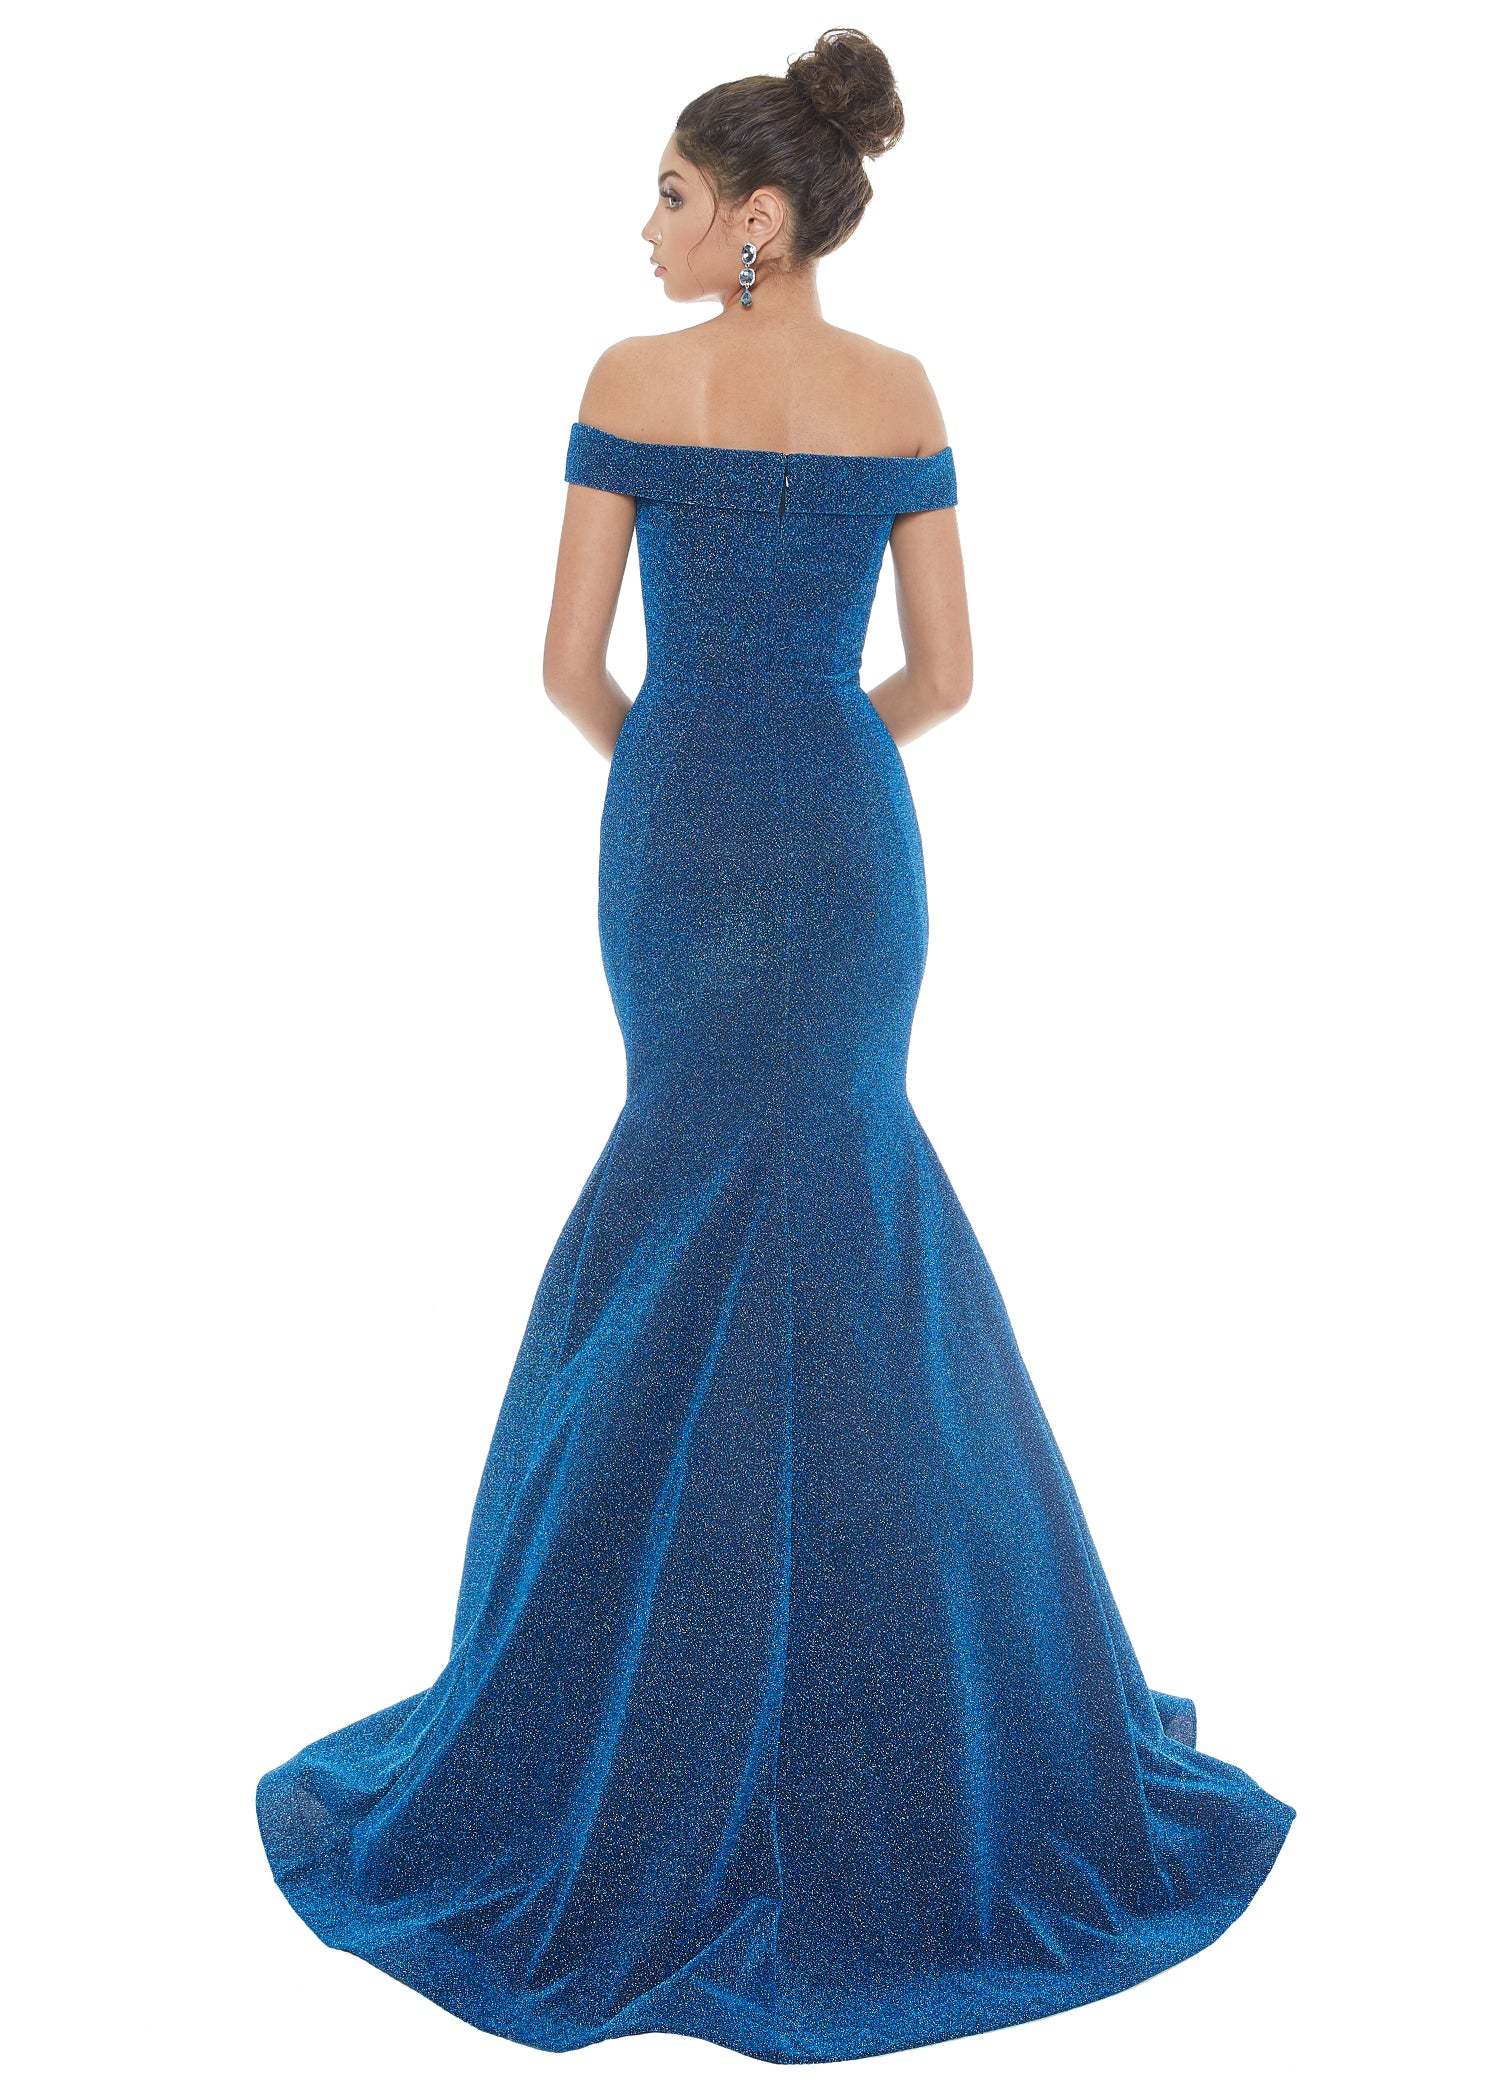 Ashley Lauren 1606 is a long fitted Metallic Shimmer fitted stretch Scuba Prom & Pageant Dress. Featuring an off the shoulder straight neckline This shimmering evening gown has a lush Trumpet skirt with a sweeping train and a horse hair edged hem.